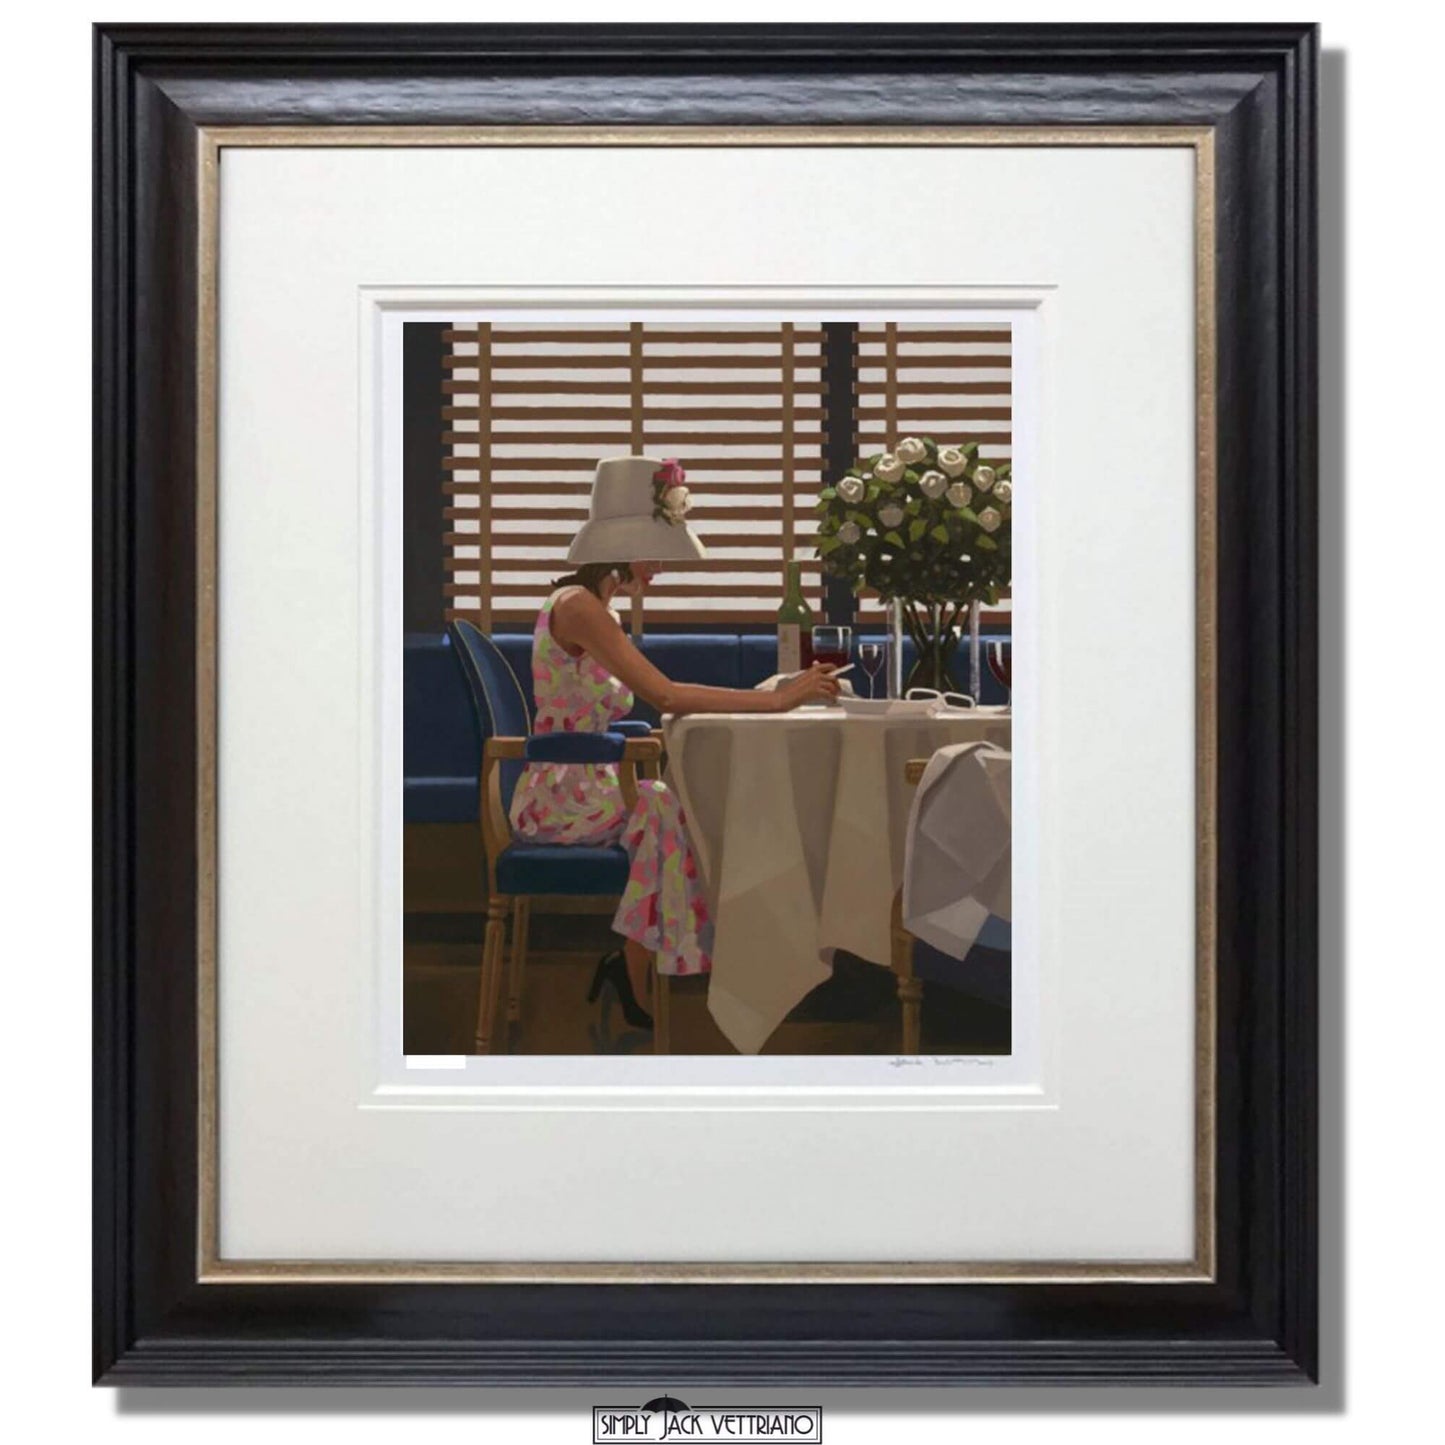 Days of Wine & Roses by Jack Vettriano Framed